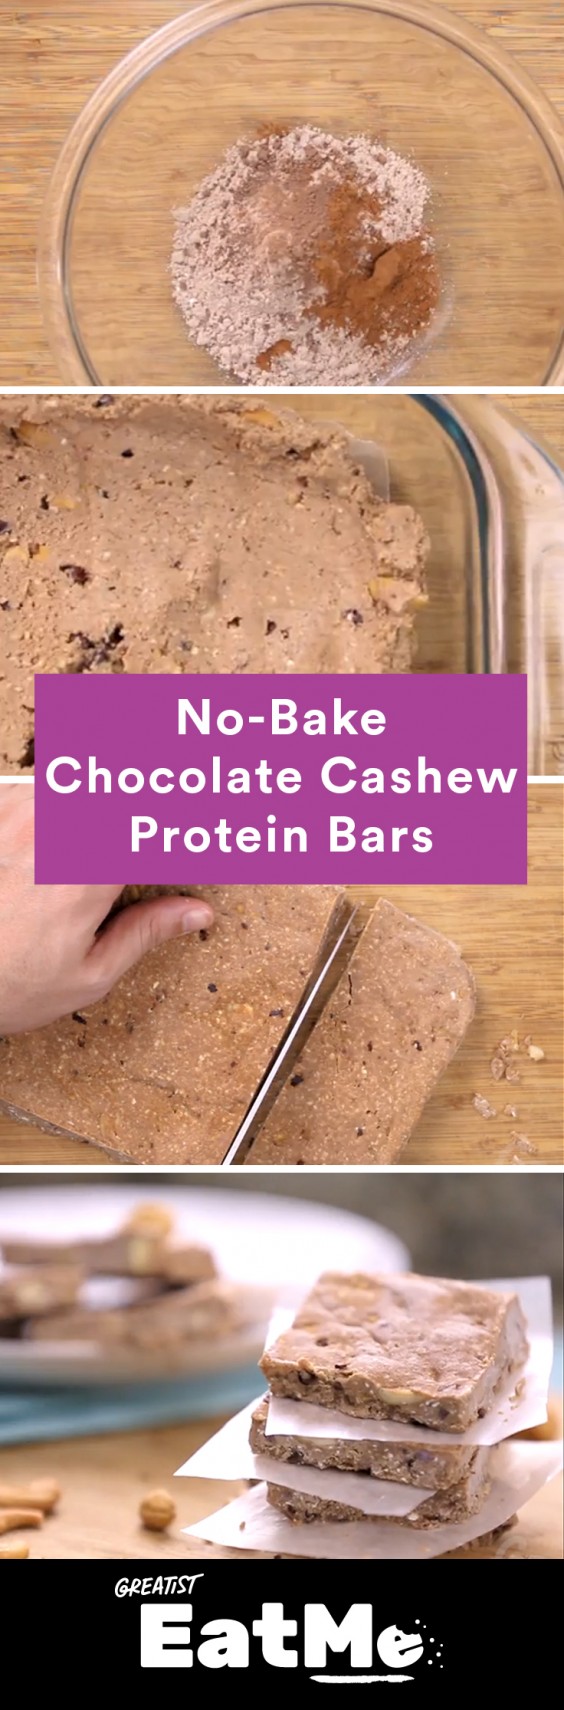 Eat Me Video: Chocolate Cashew Protein Bars